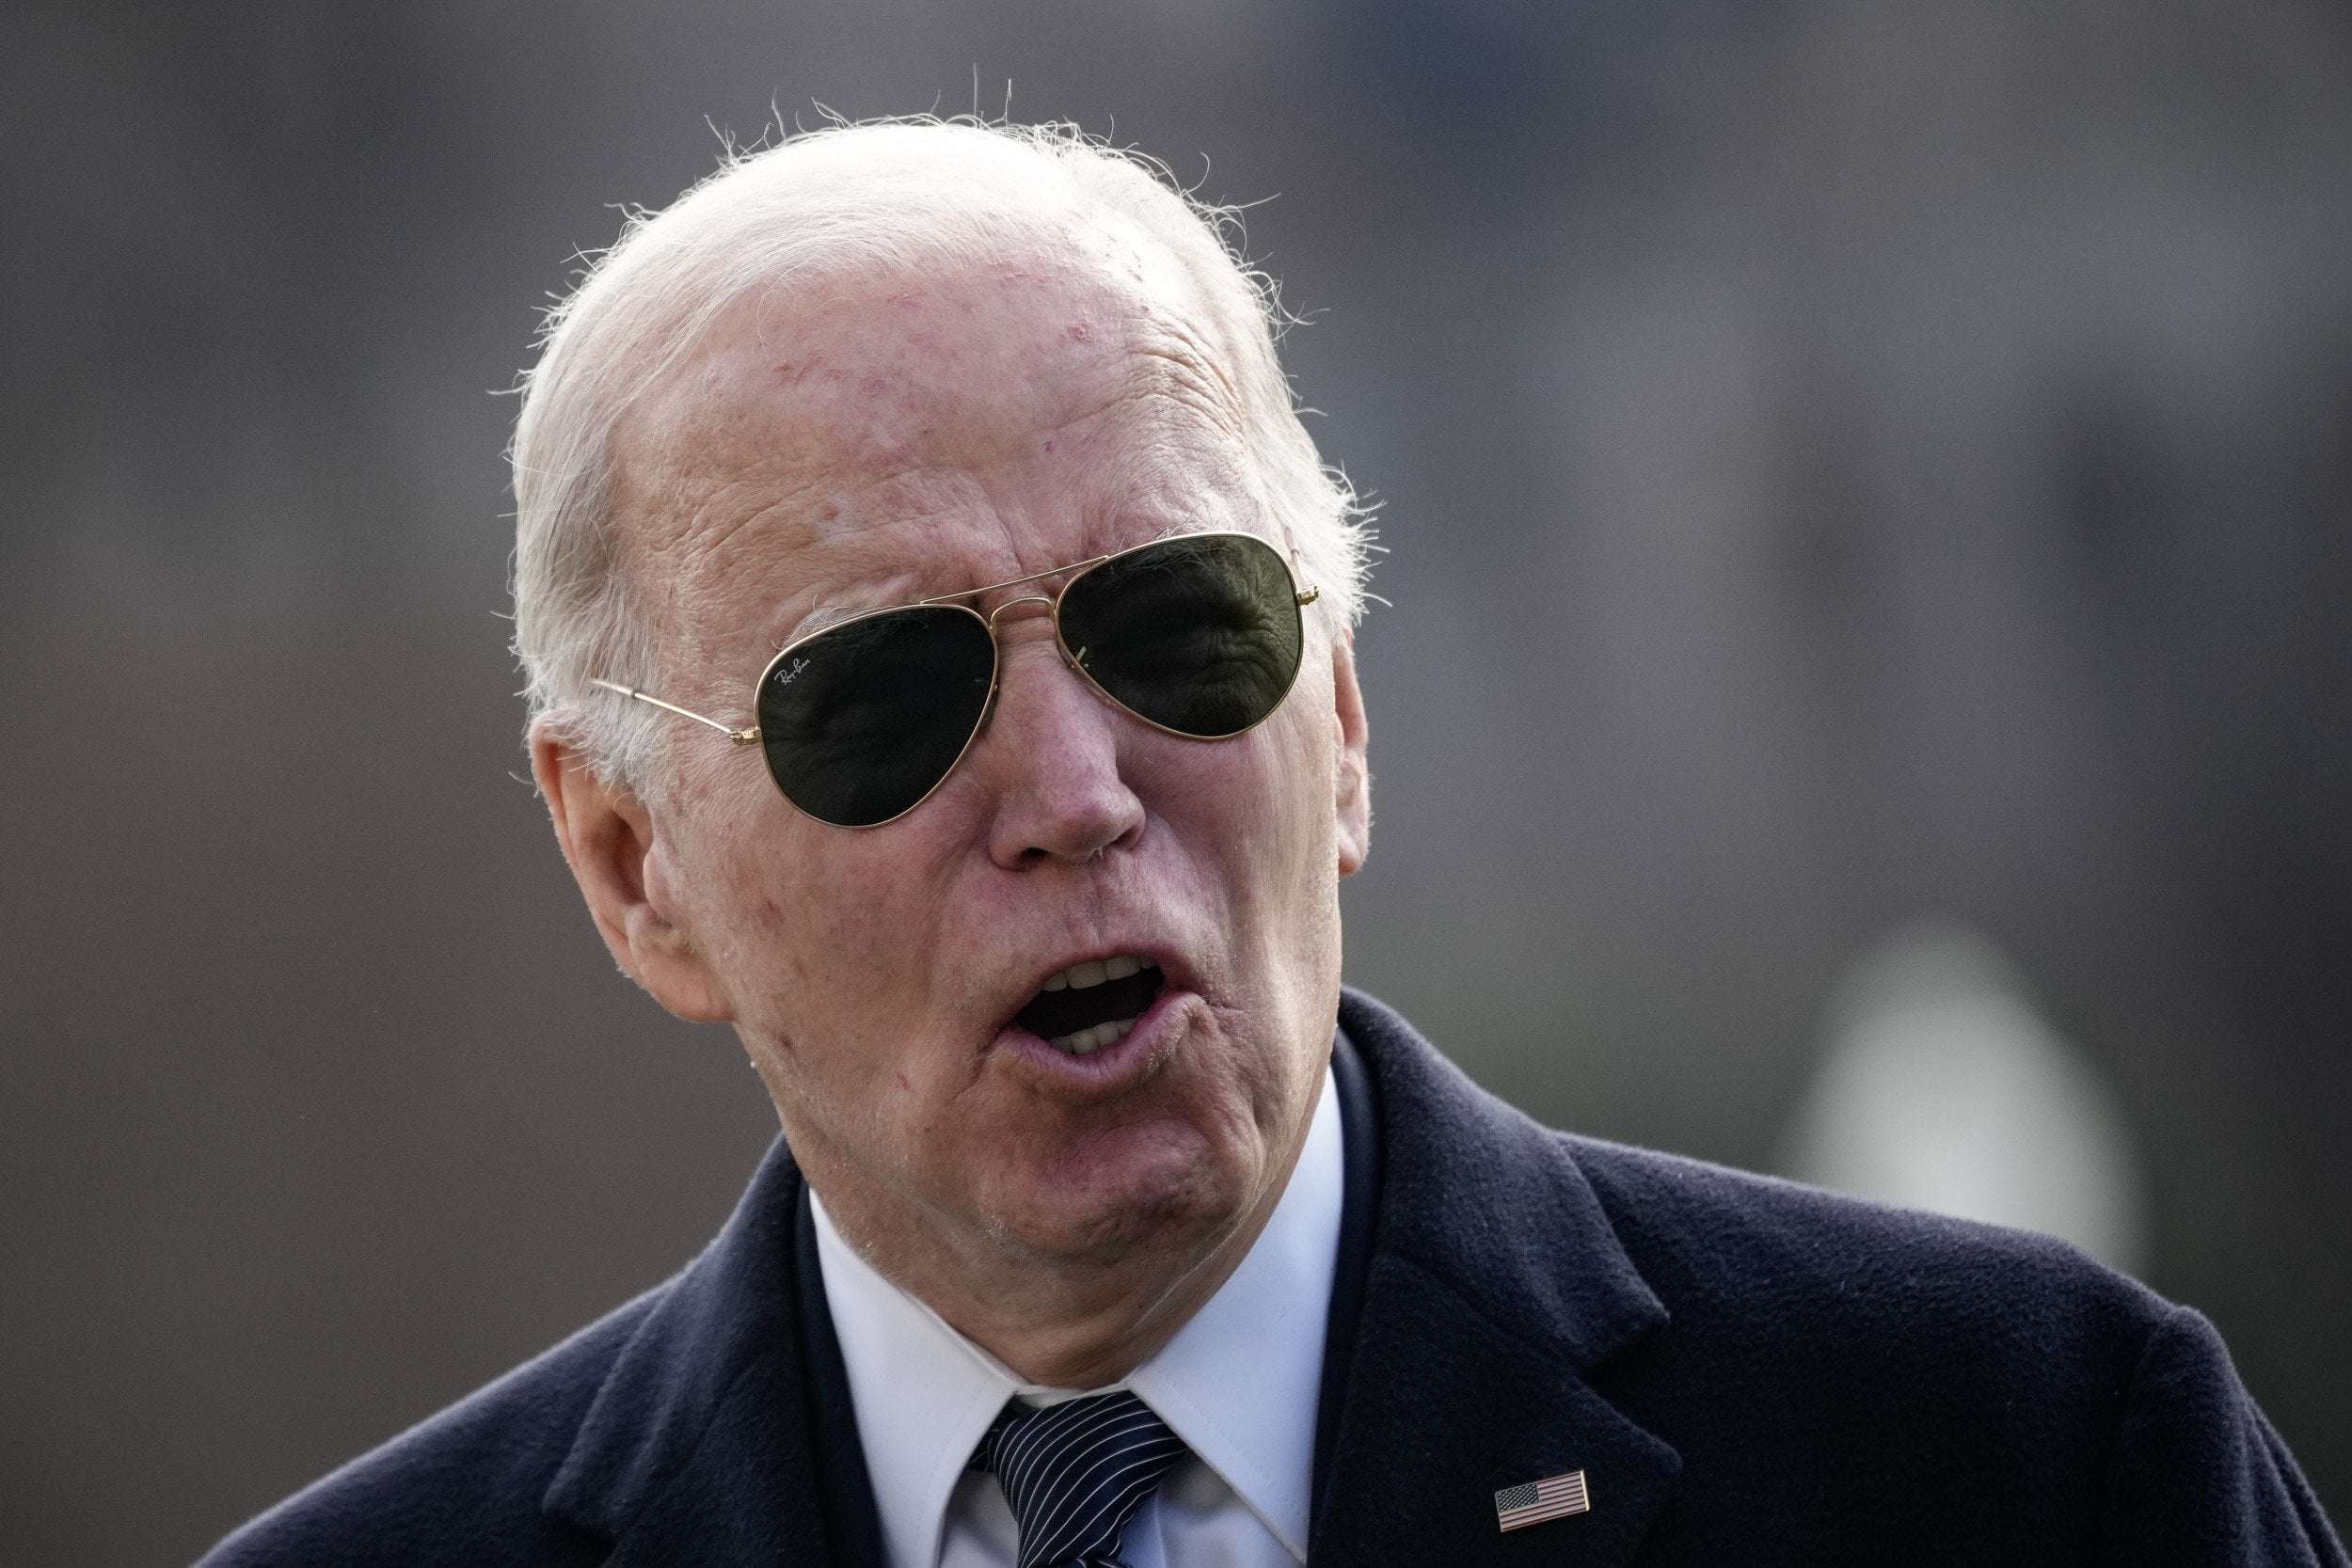 image for Republicans Threaten to Take Joe Biden Off Ballot in States They Control